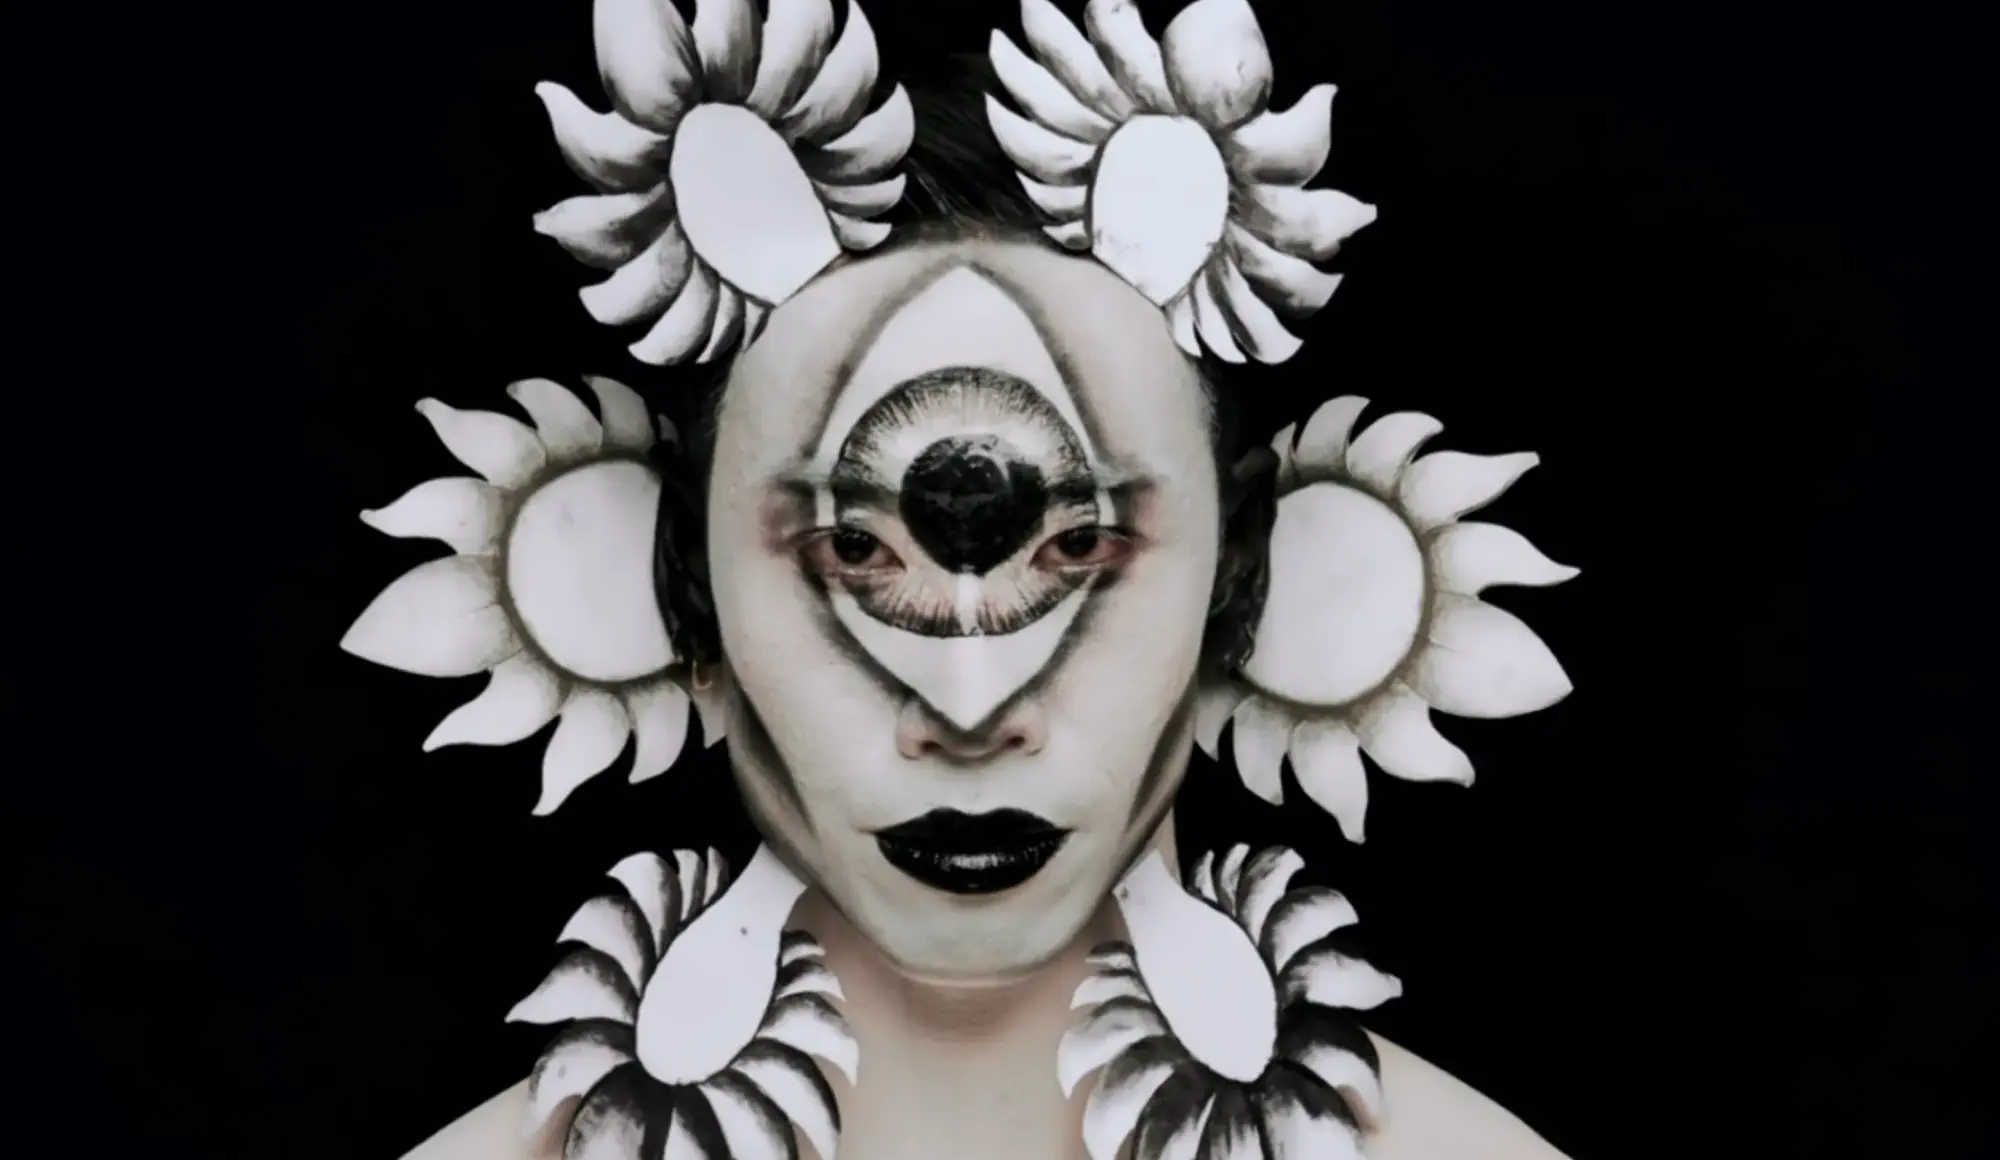 six petals surround a face painted black and white with a central eye motif